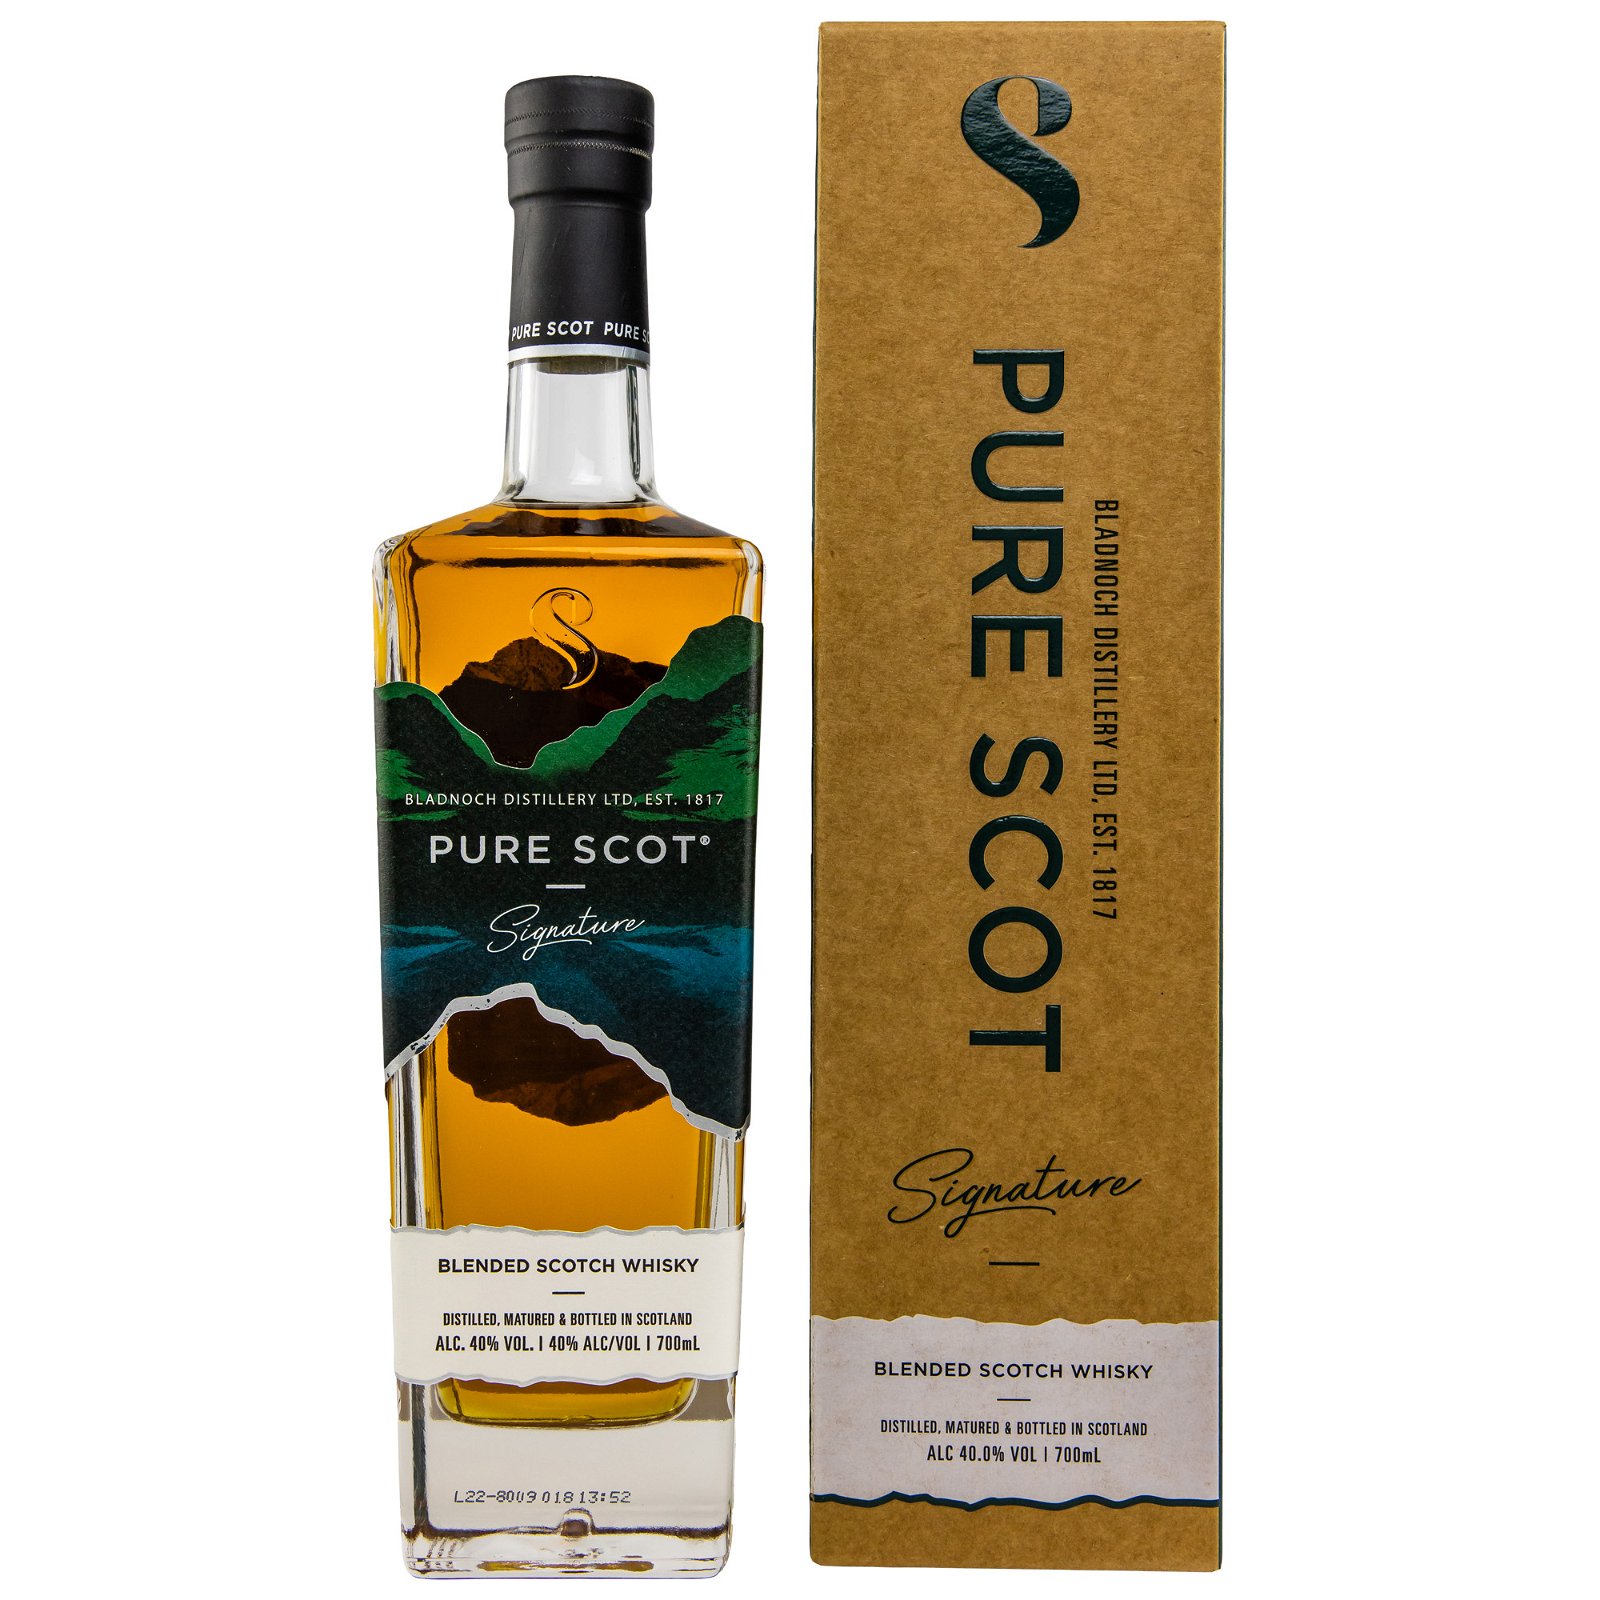 Pure Scot Blended Scotch Whisky (mit Umverpackung)